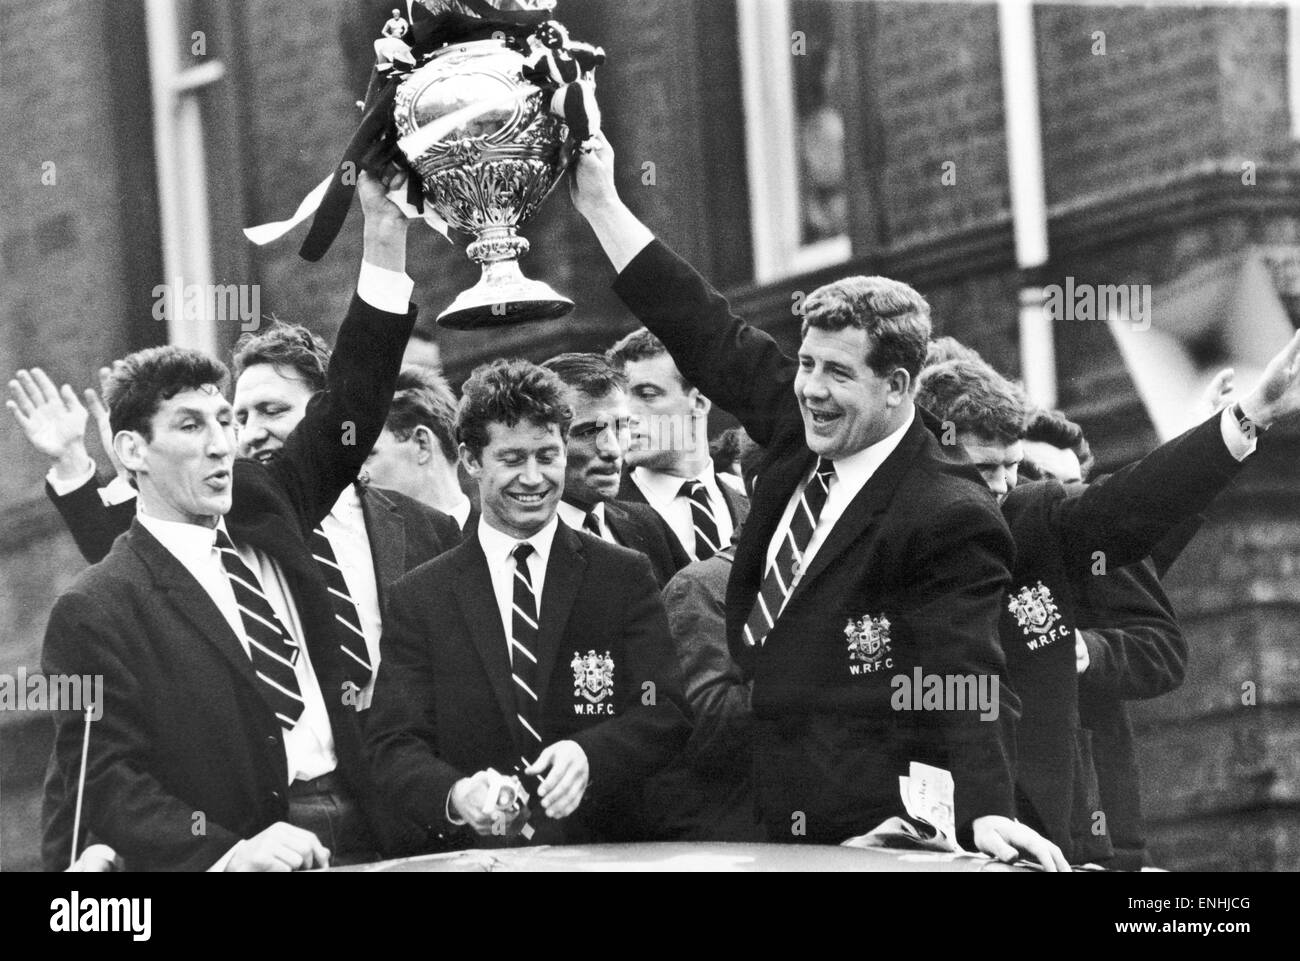 Holding the cup aloft are Captain Vince Karalius (left) and Lance Todd trophy winner Frank Collier during Widnes civic reception following their victory over Hull Kingston Rovers in the Rugby League Cup Final 11th May 1964 Stock Photo